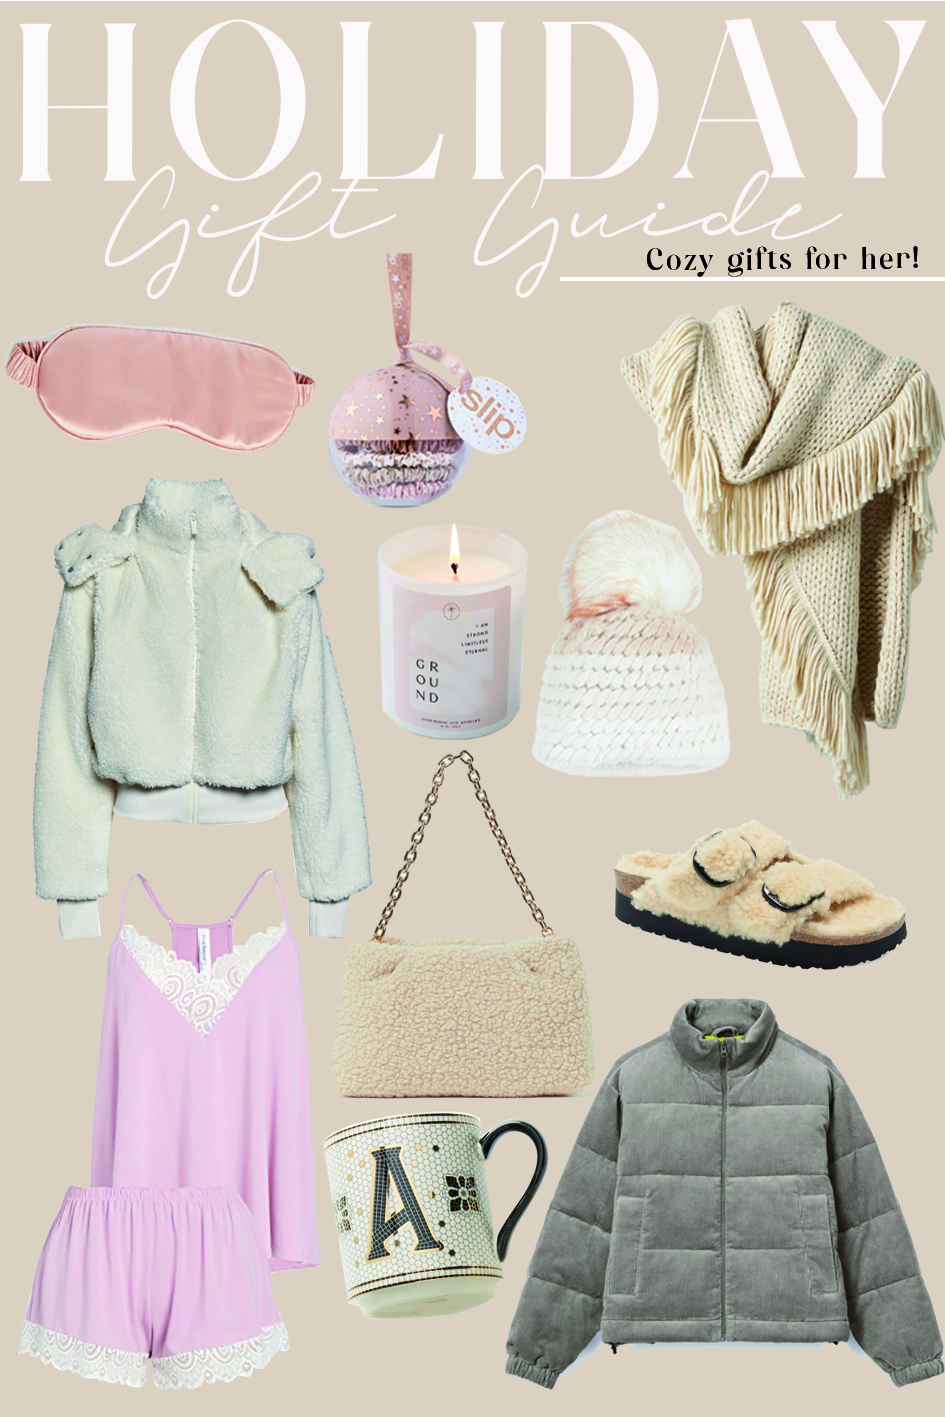 HOLIDAY GIFT GUIDE: GIFTS FOR THE WOMEN IN YOUR LIFE, CHIC TALK